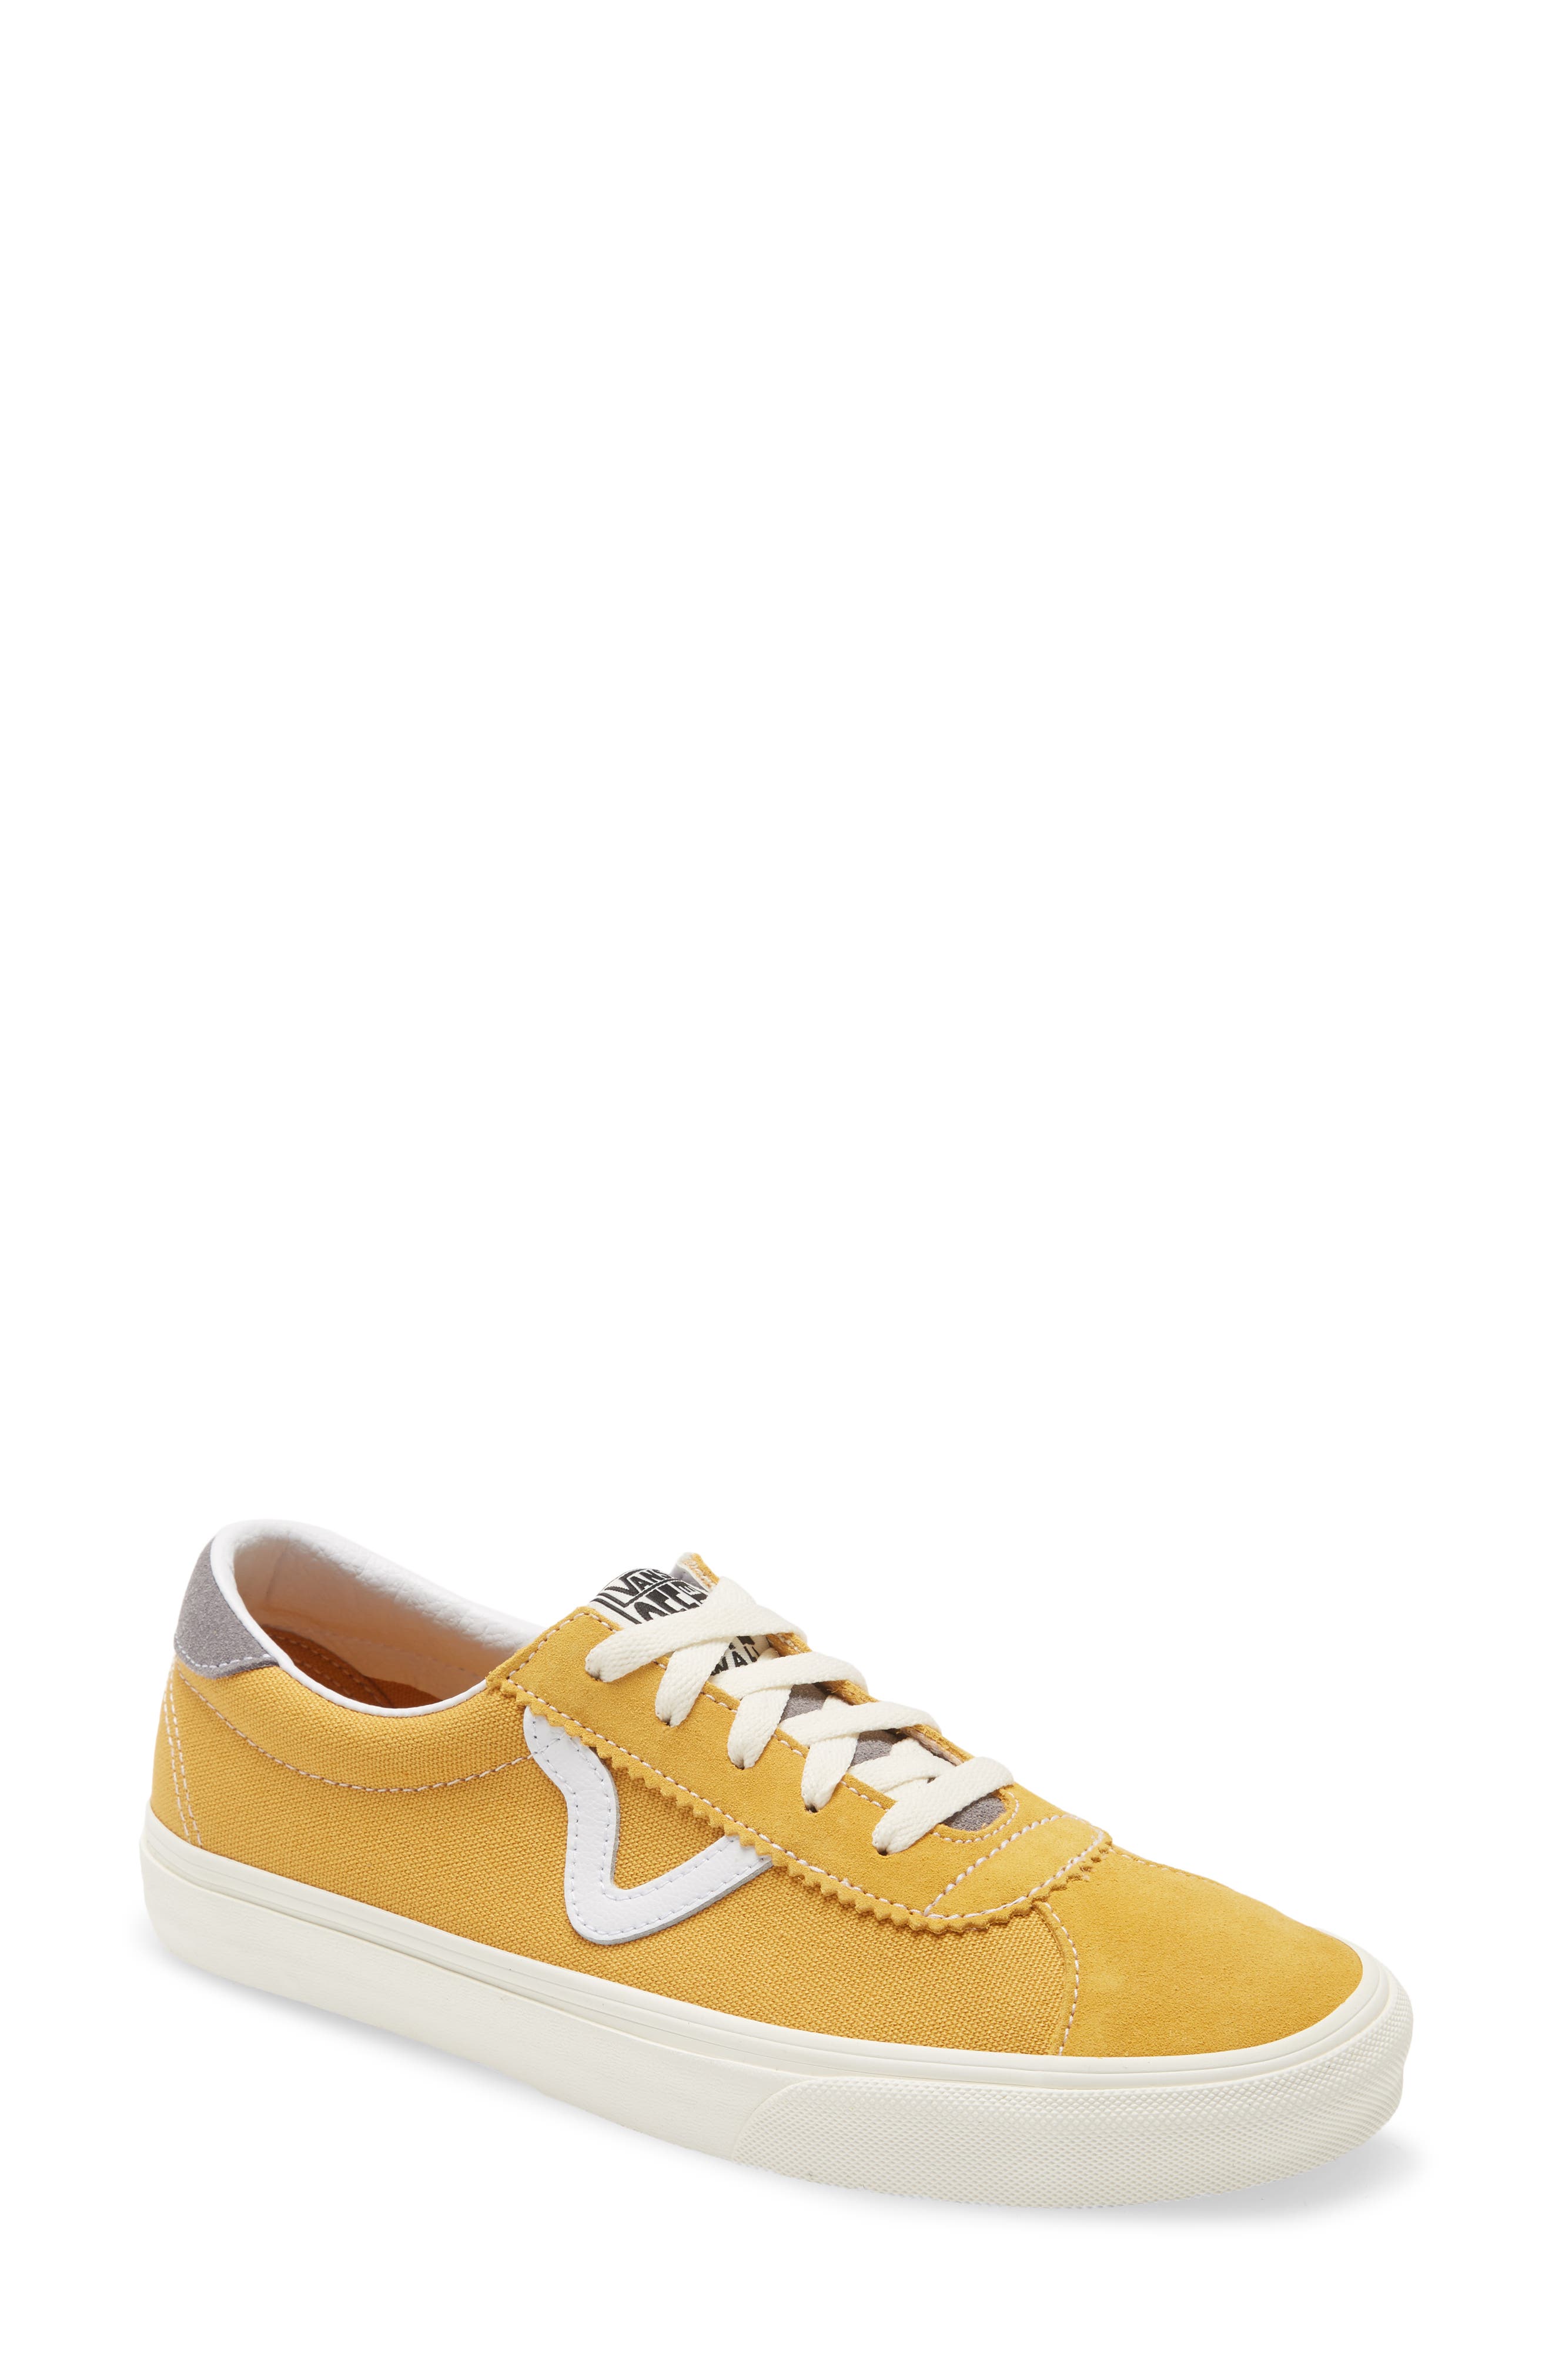 yellow sneakers athletic shoes